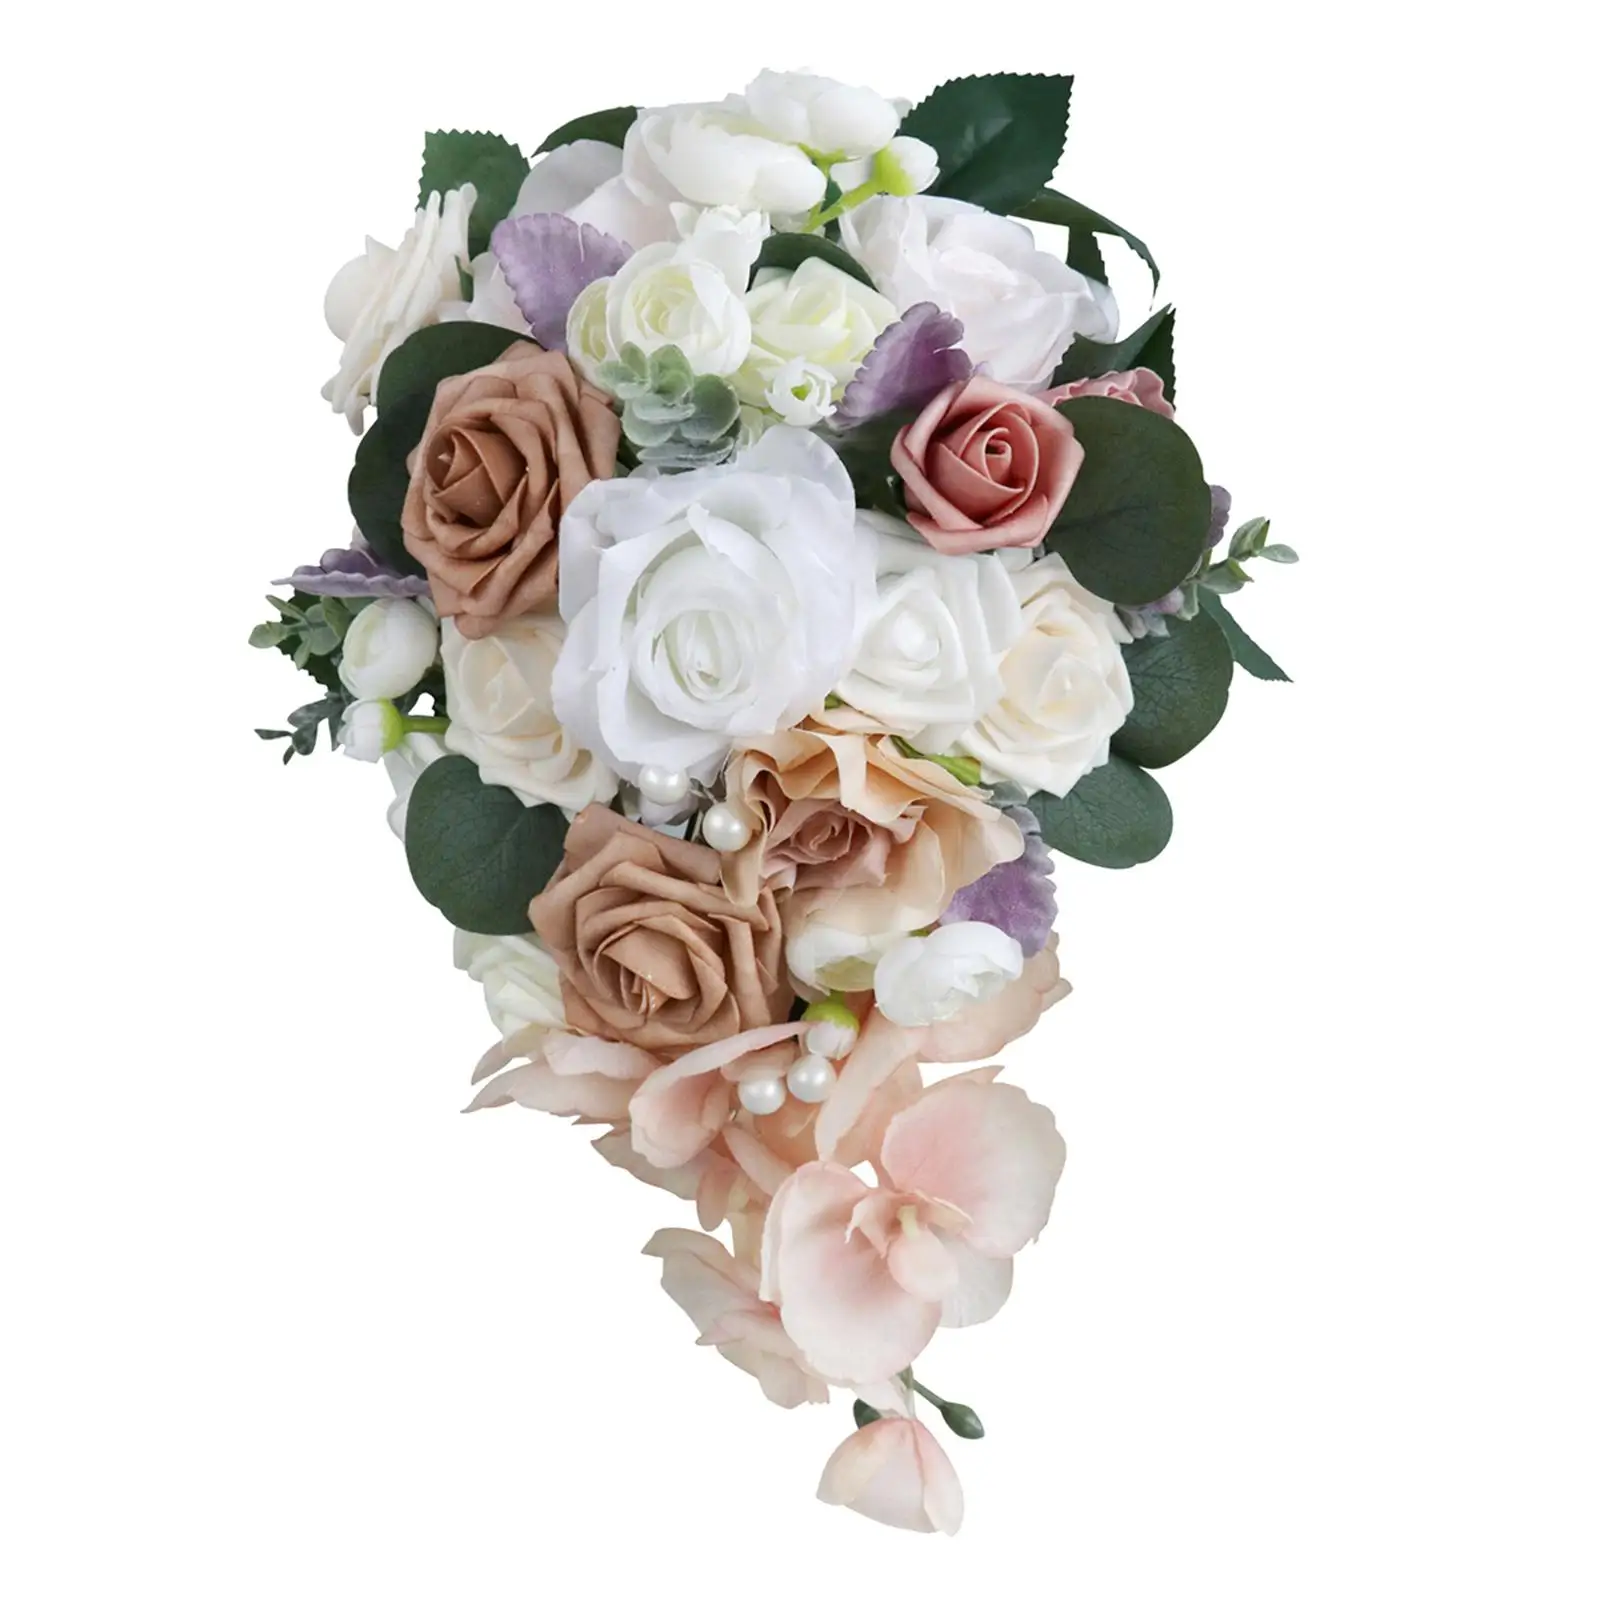 Artificial Holding Flower Decorative Romantic Wedding Holding Bouquet for Party Ceremony